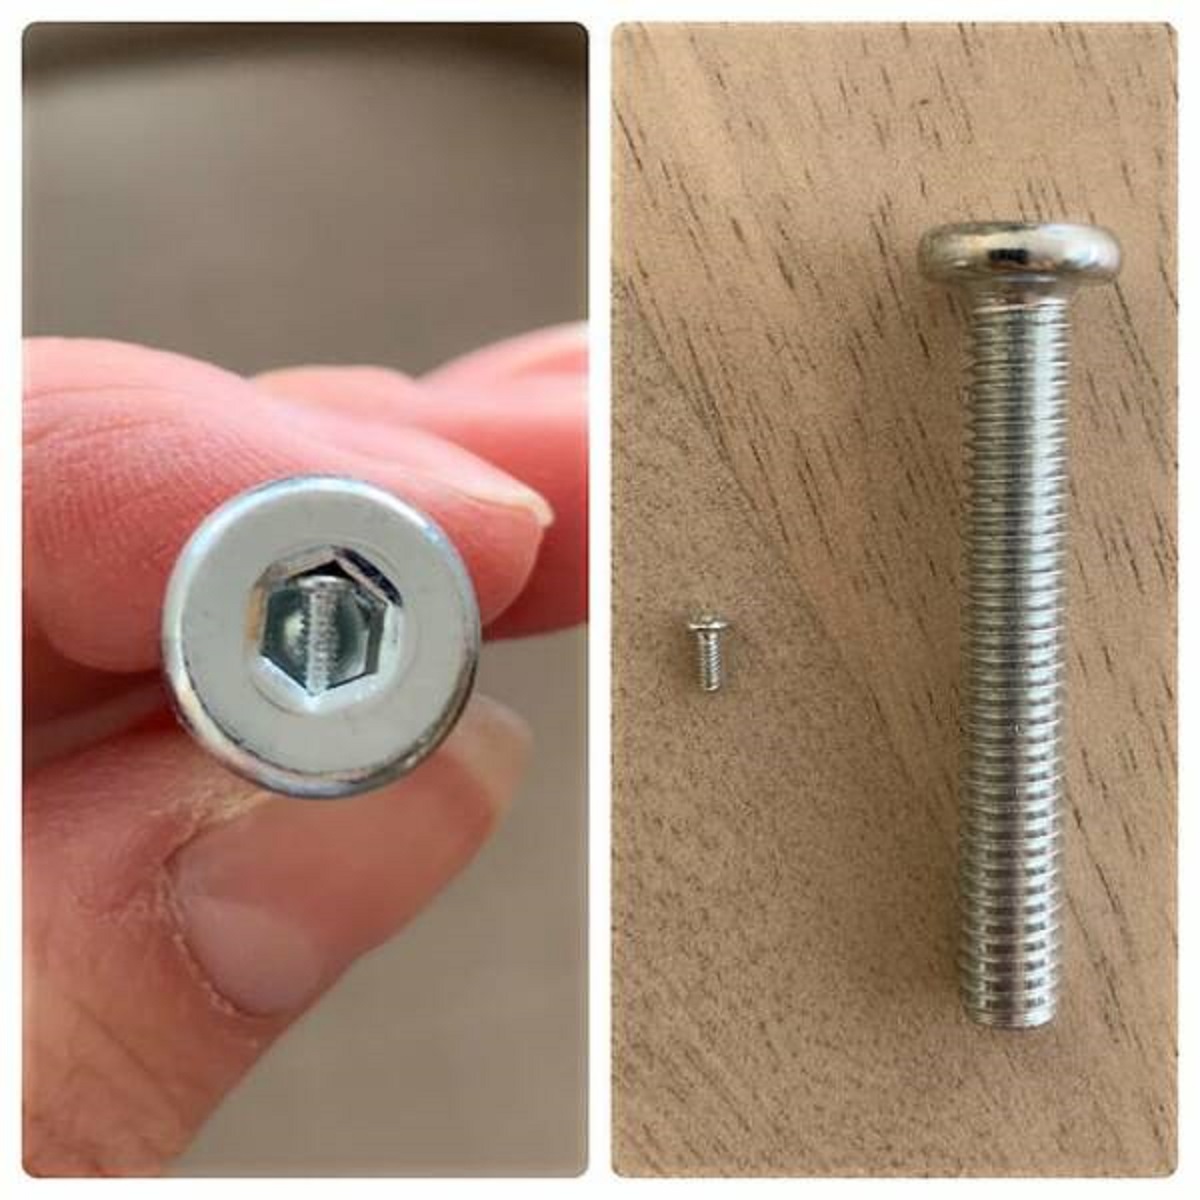 "My big screw came with a tiny screw stuck in it"